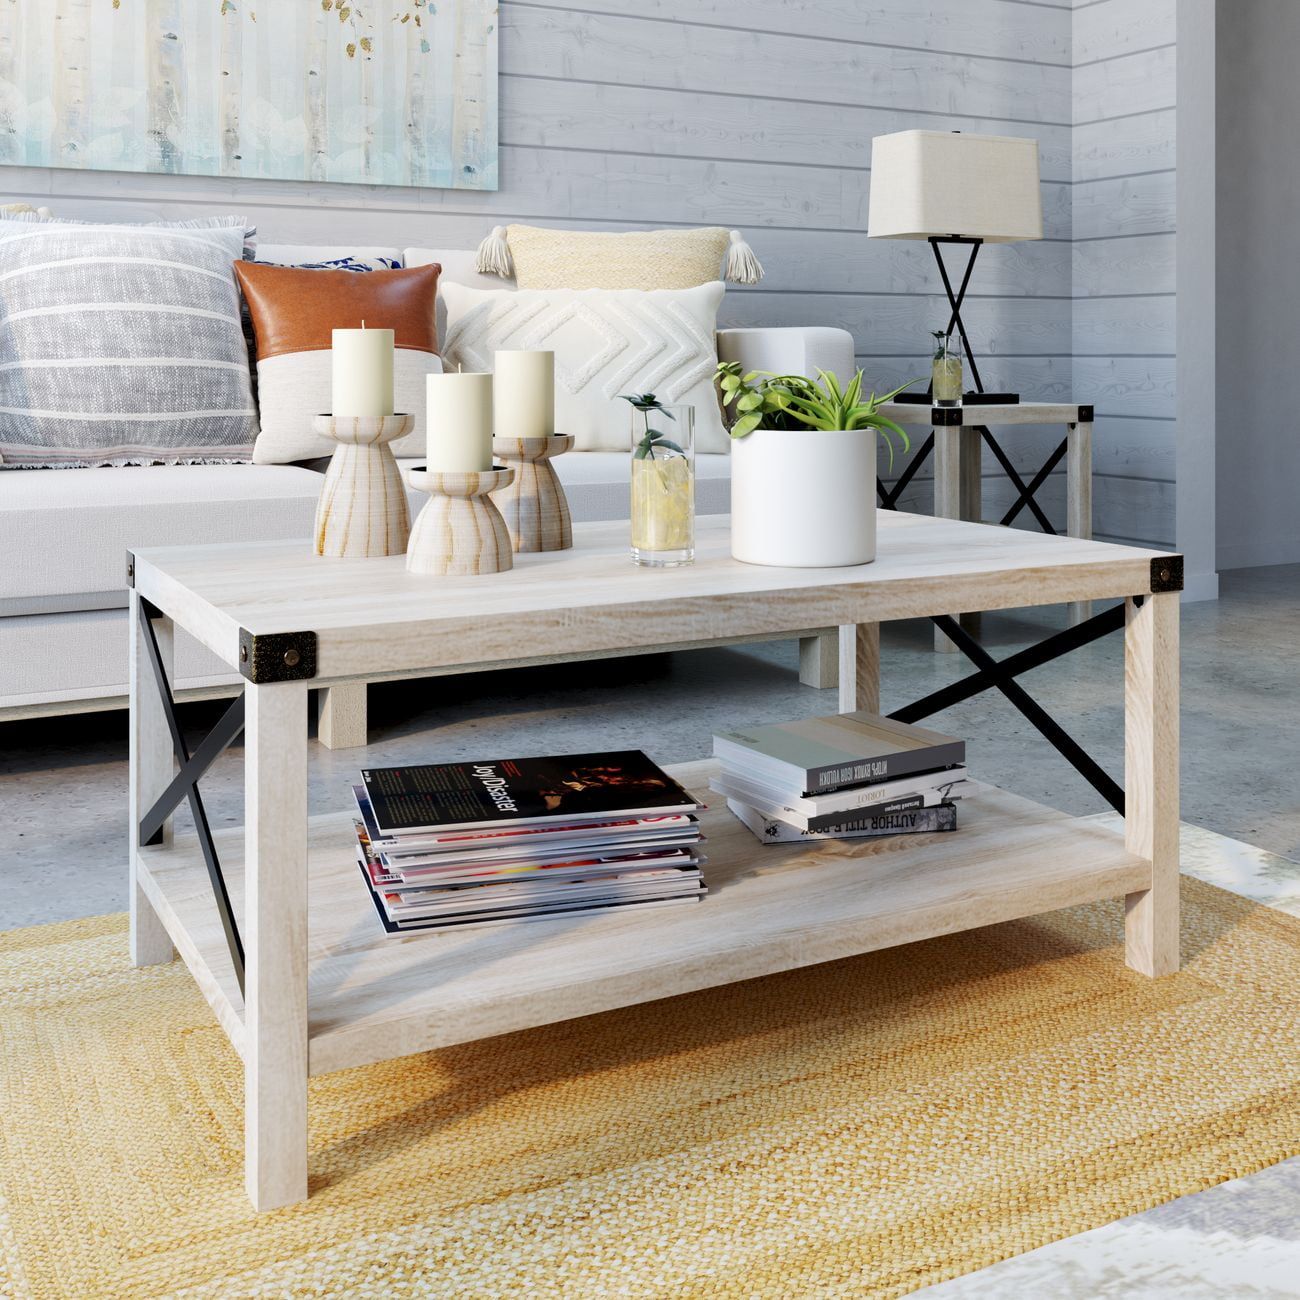 Woven Paths Magnolia Metal X Coffee Table, White Oak – Walmart With Regard To Woven Paths Coffee Tables (View 9 of 15)